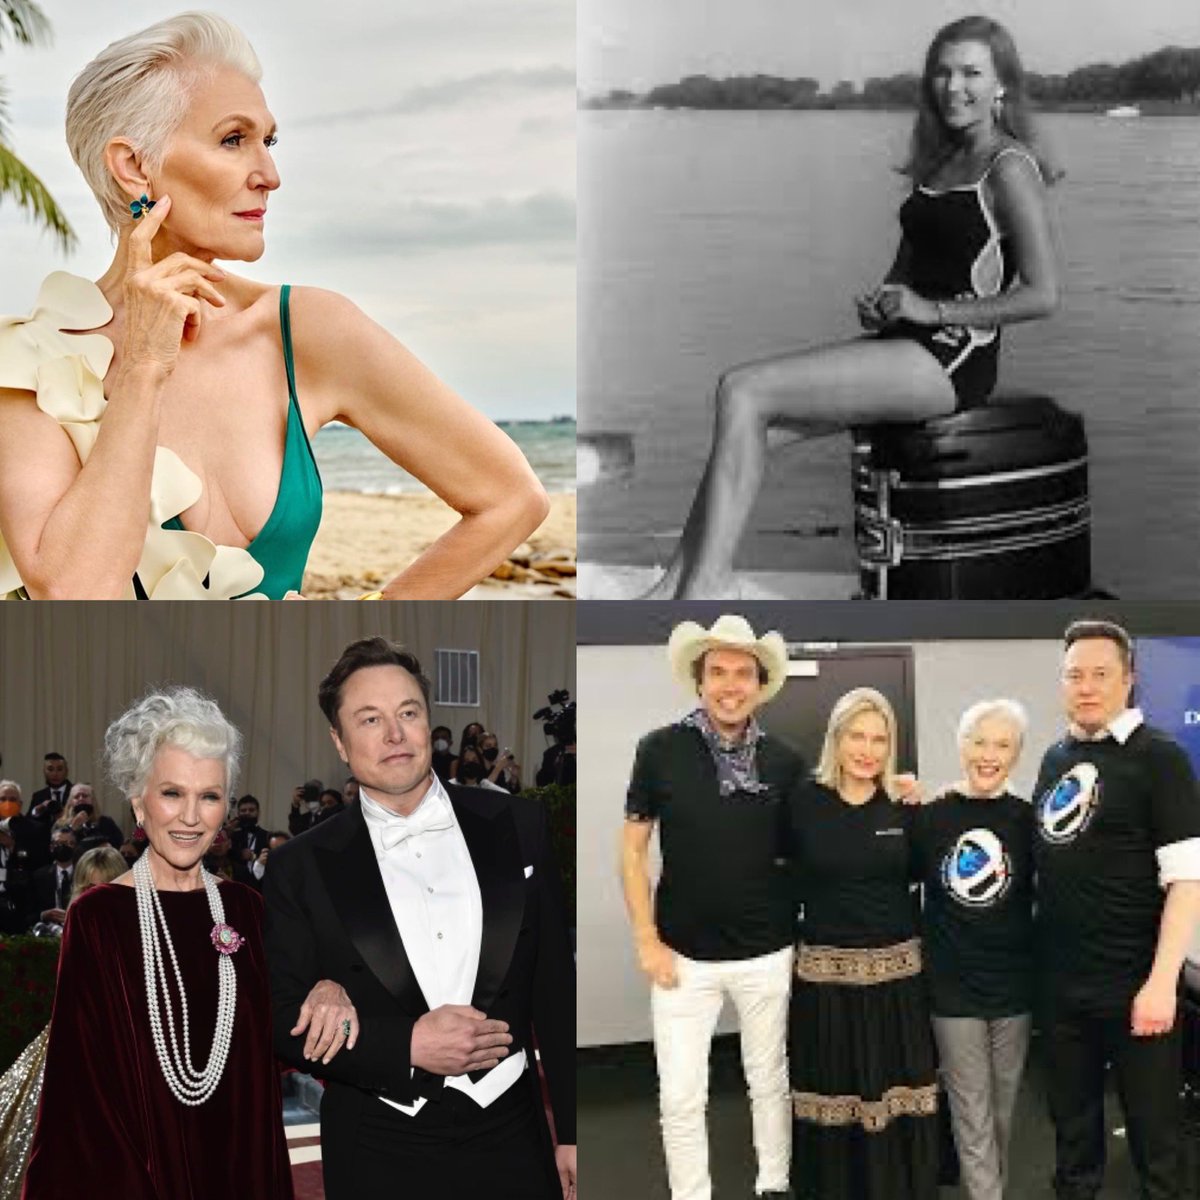 Happy birthday to @mayemusk. You are a role model and inspiration. Hope you have a fantastic day. @elonmusk @kimbal @ToscaMusk